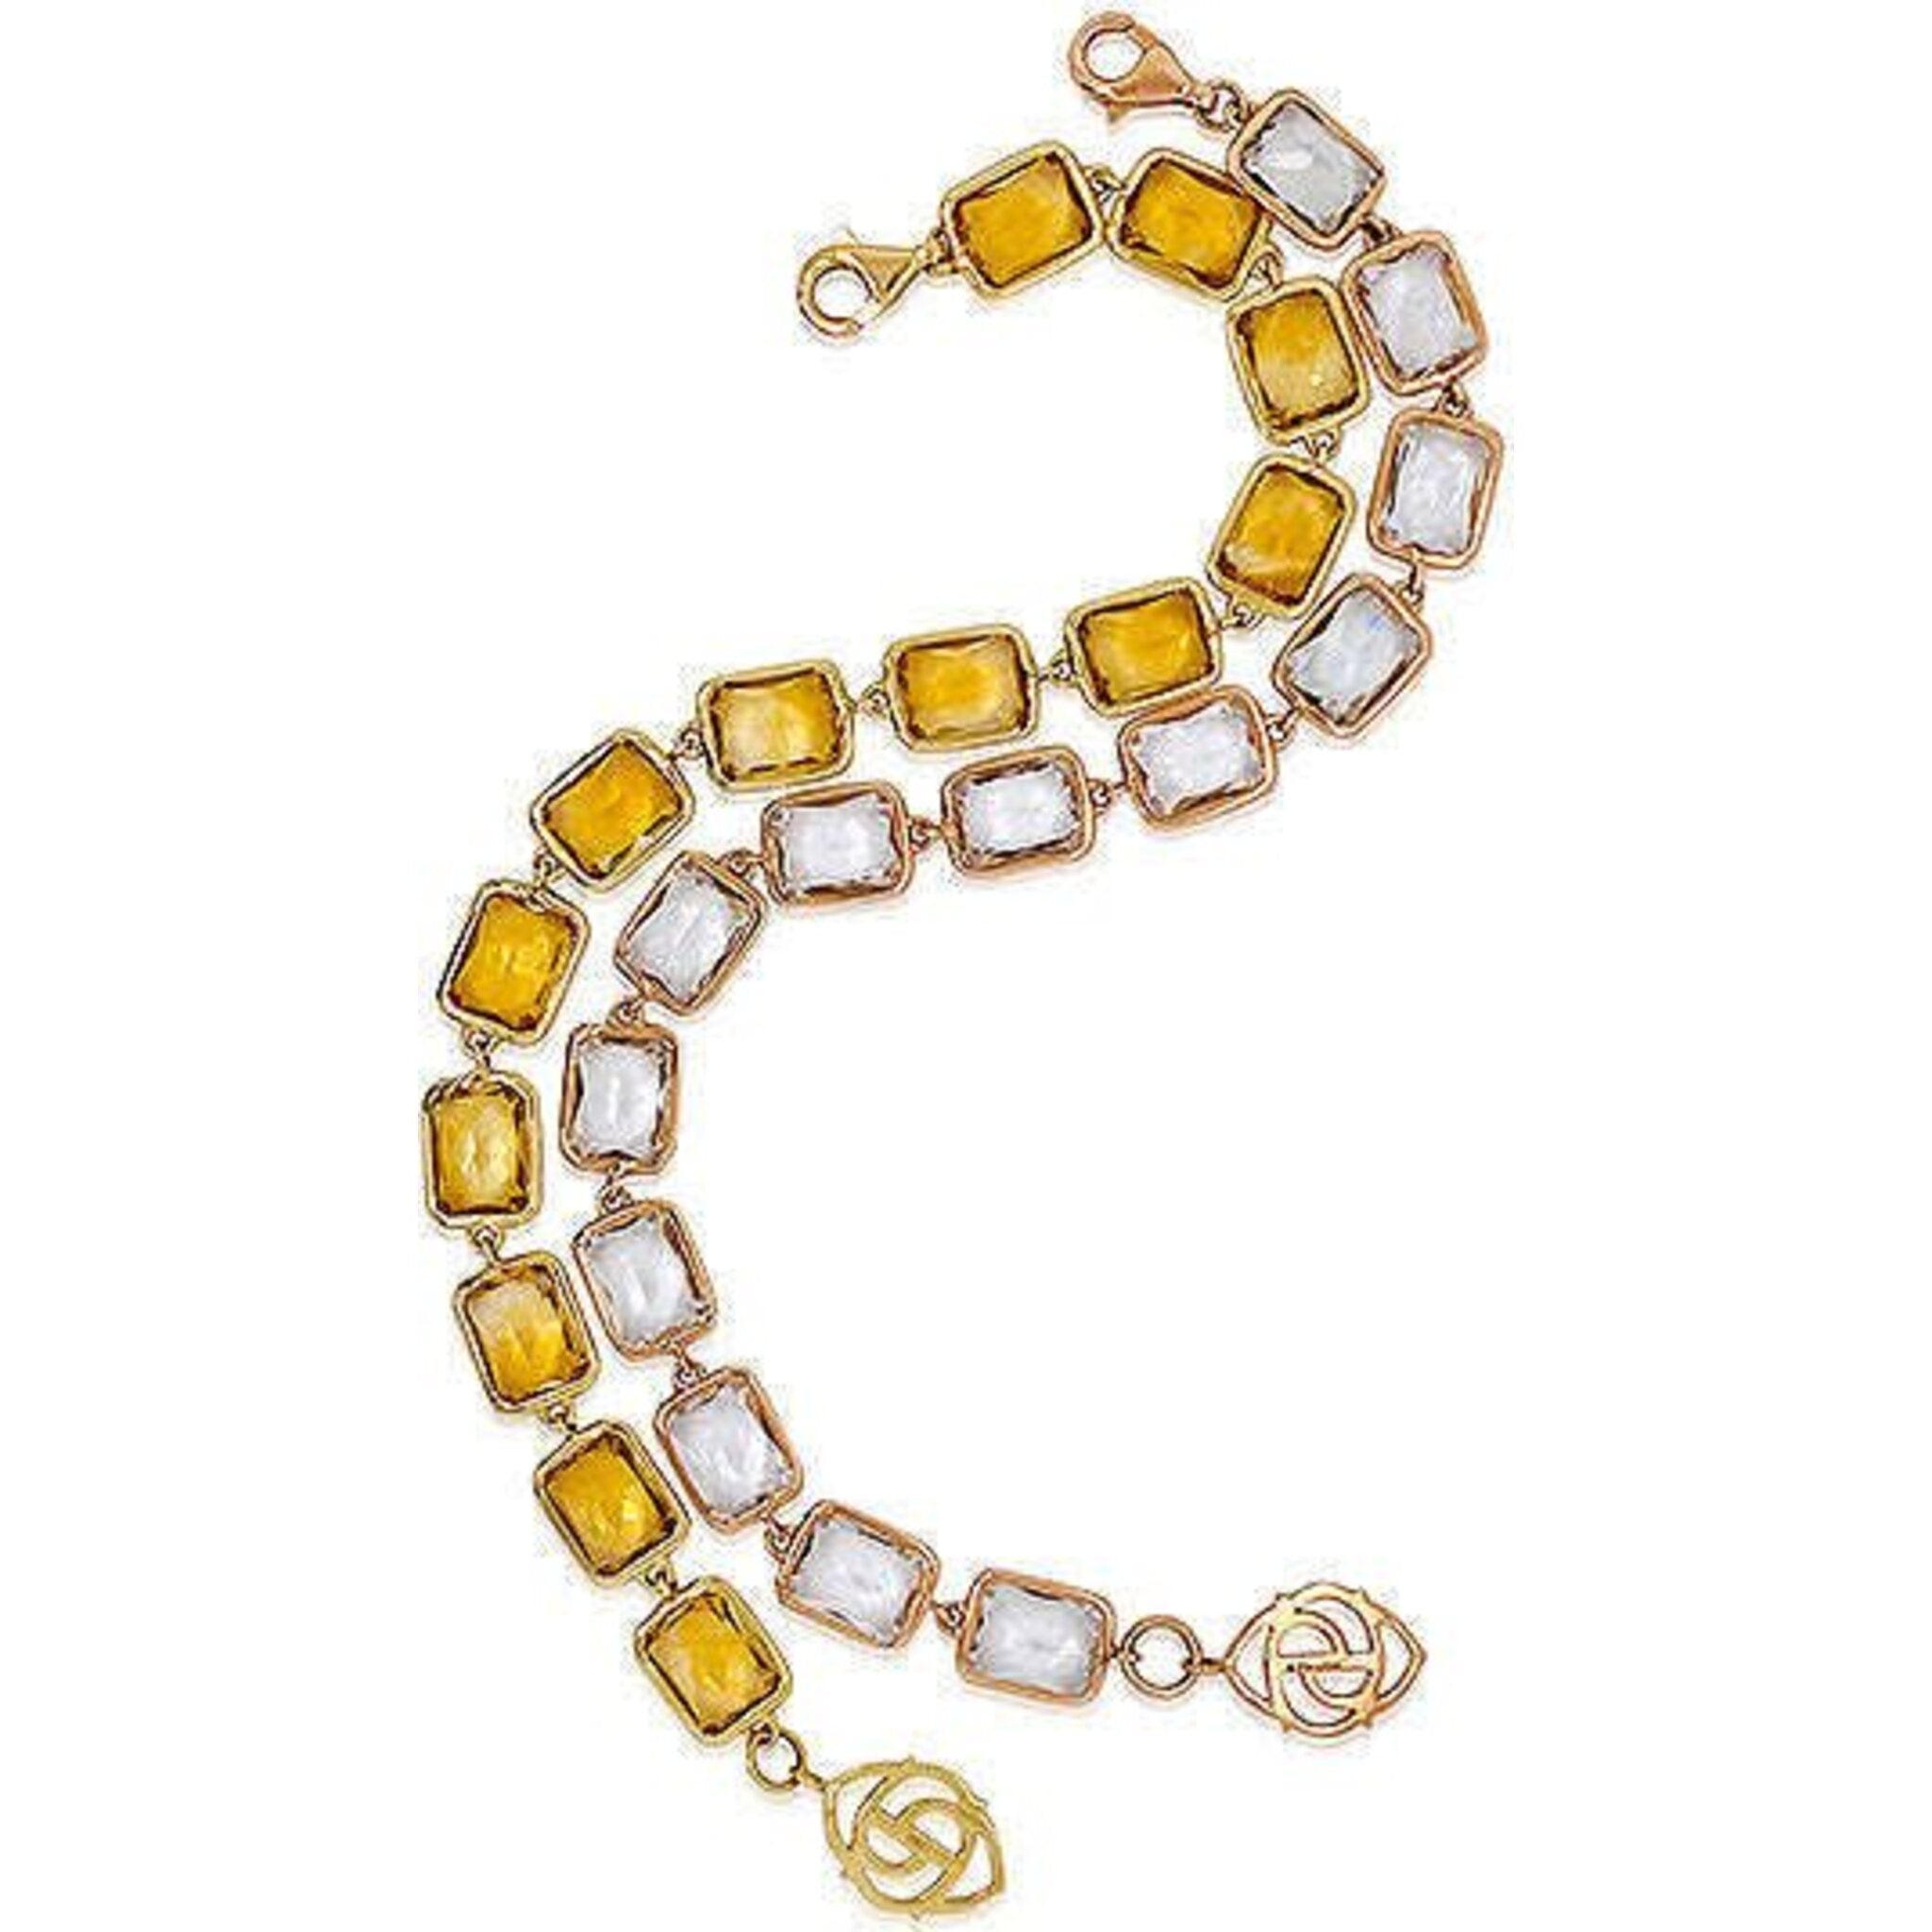 Brings Prosperity and Happiness Citrine bracelet